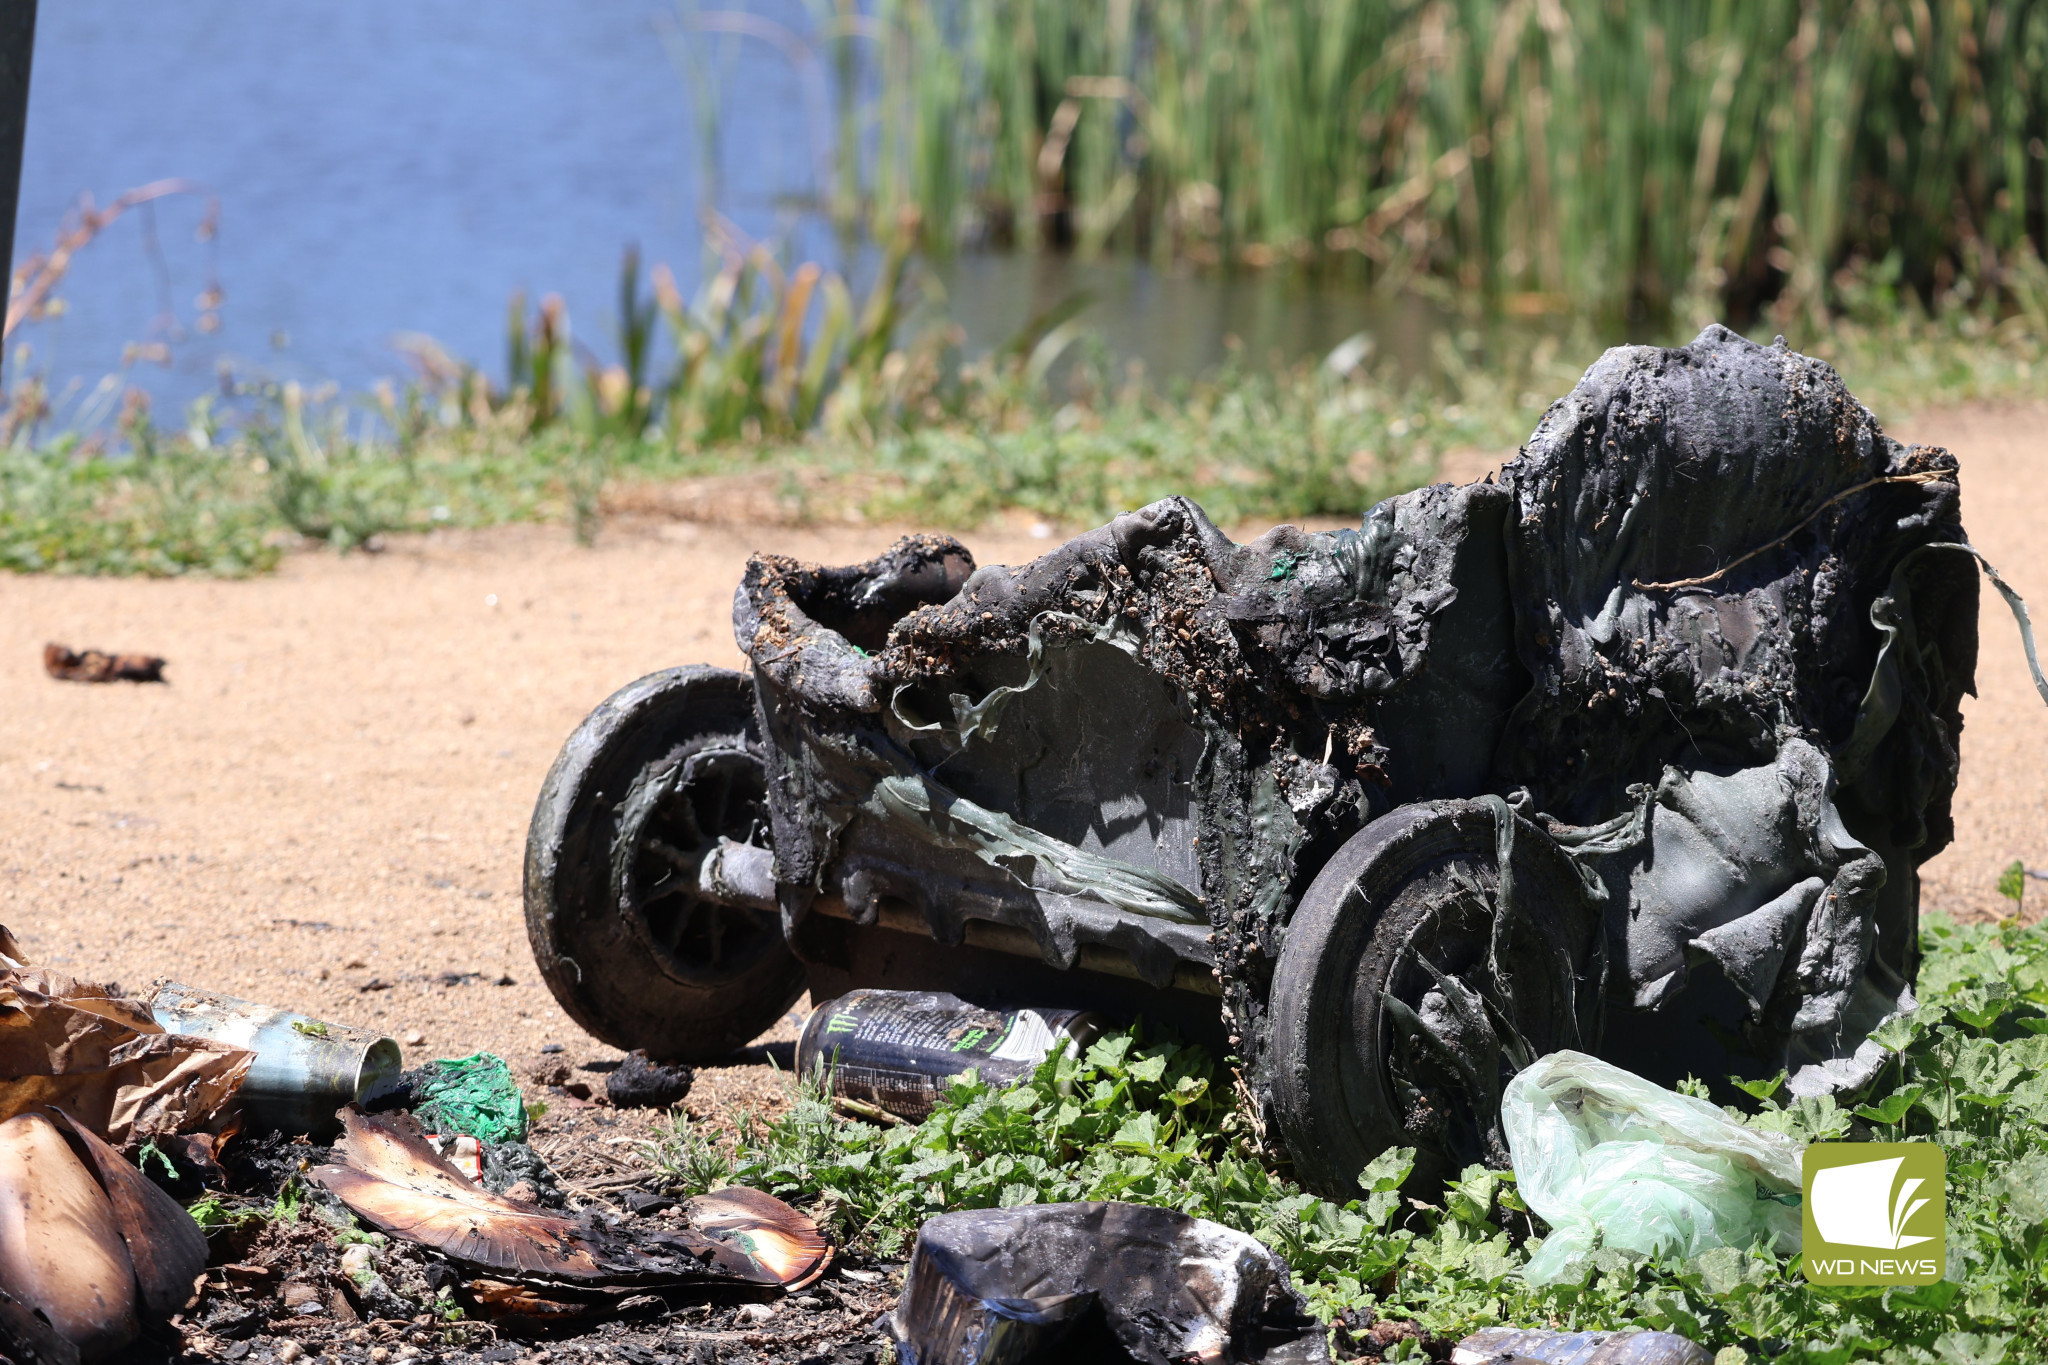 Reckless: Police are seeking assistance from the public in regards to a number of incidents which have happened in Mortlake recently, including a number of fires having been started at Tea Tree Lake.